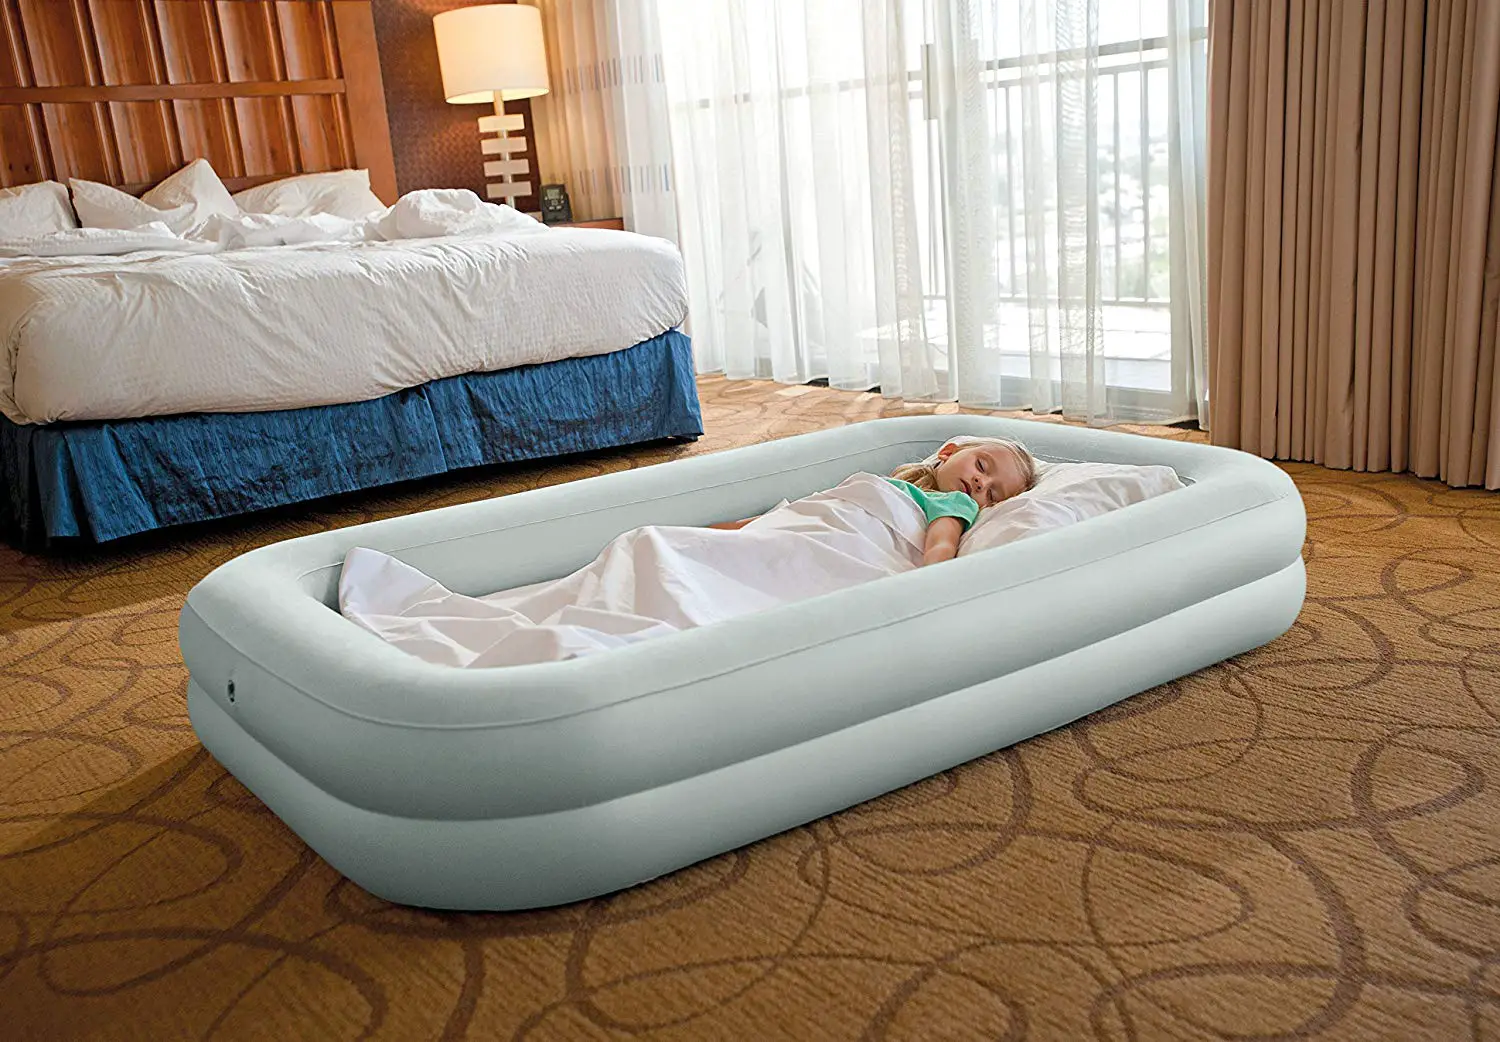 Top 10 Best Portable Toddler Bed in 2020